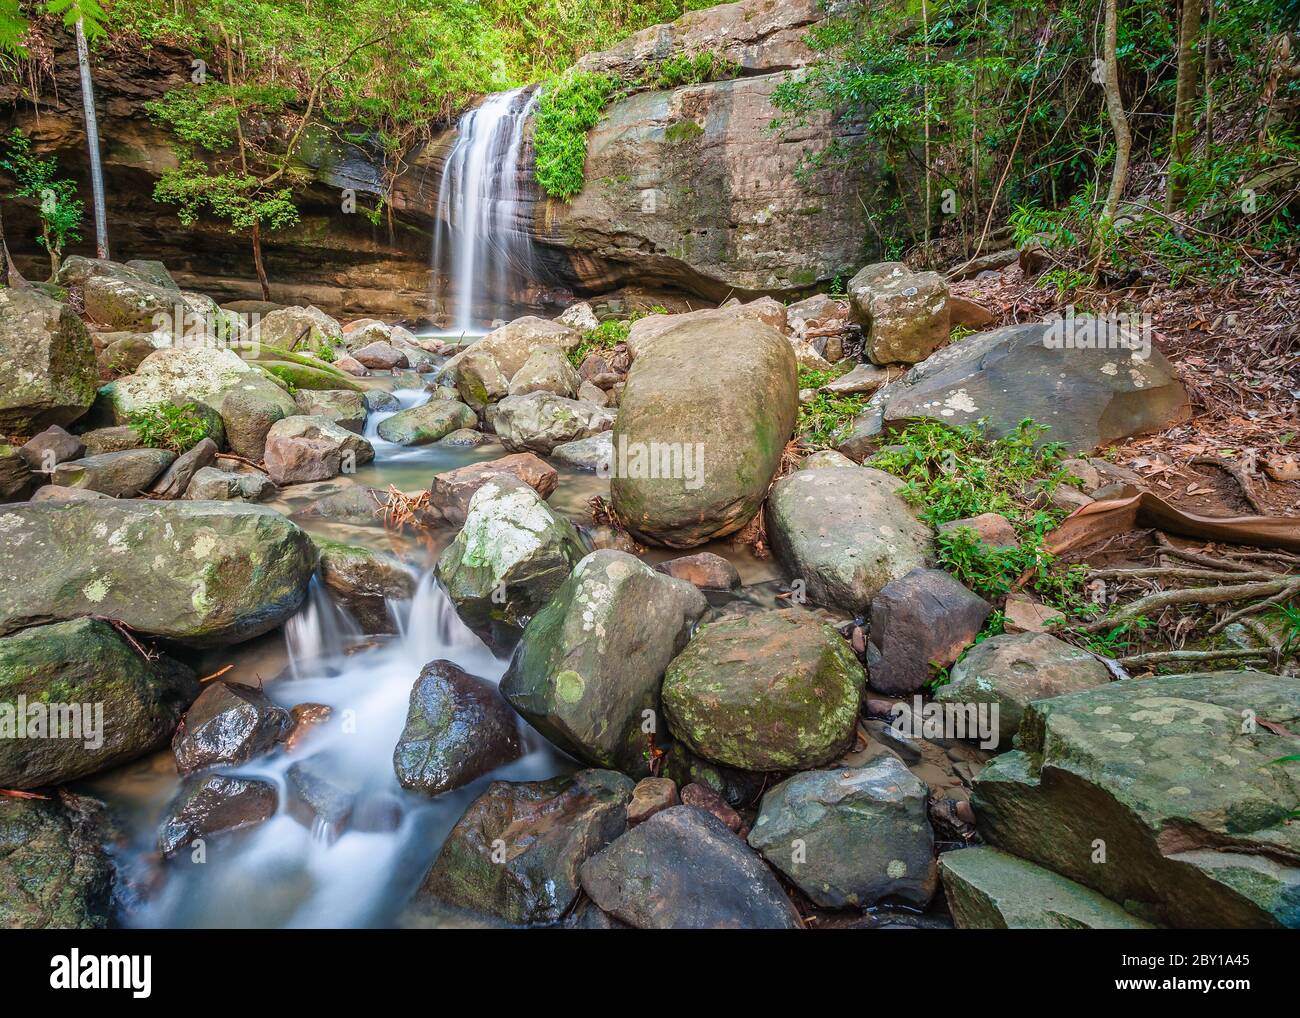 The picturesque waterfall and rock pool at the end of Buderim Forest Park's bush walk on the Sunshine Coast in South-east Queensland. Stock Photo